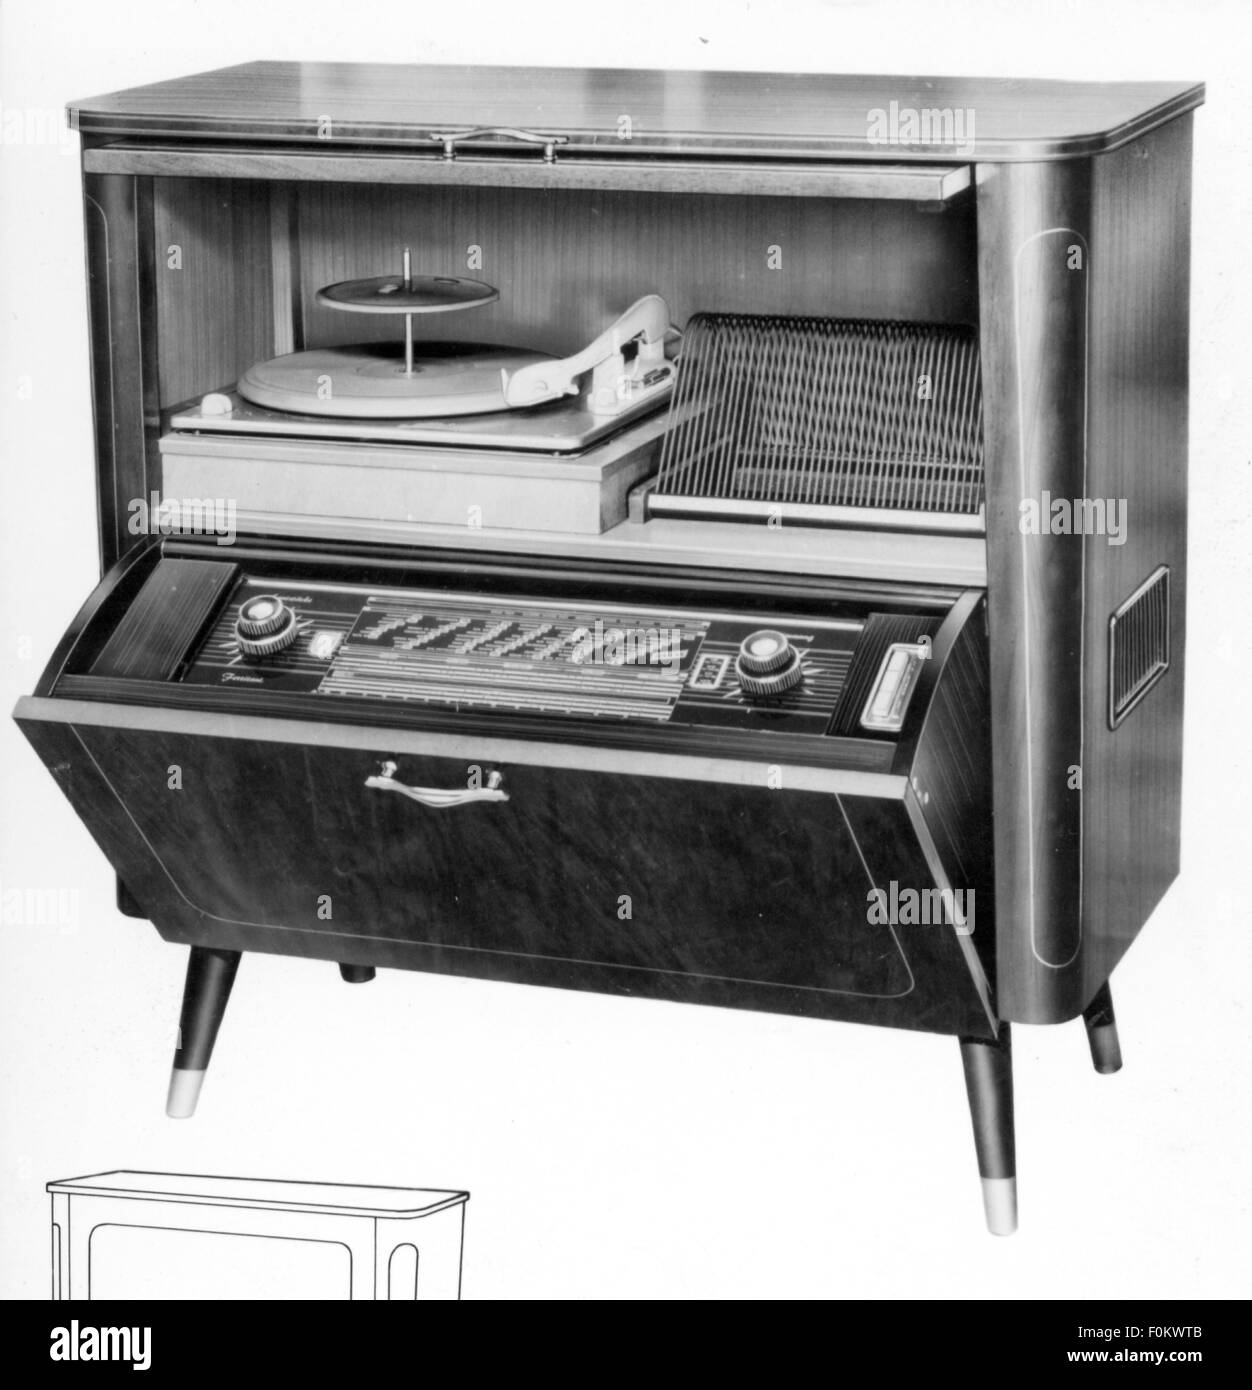 technics,consumer electronics,radiogram W656,Tonfunk GmbH,Karlsruhe,1956,W 656,W-656,electric appliance,electrical device,electric appliances,electrical devices,radio,radios,radio reception,receiver,receivers,record players,record player,record,records,record rack,record racks,records rack,music,radiogramophone,cabinet,furniture,furnishings,furnishing,technology,technologies,Baden-Wuerttemberg,Baden Wuerttemberg,Wuertemberg,Baden-Wurtemberg,Wurtemberg,Wurttemberg,Baden-Wuertemberg,Baden-Württemberg,Württemberg,industry,,Additional-Rights-Clearences-Not Available Stock Photo